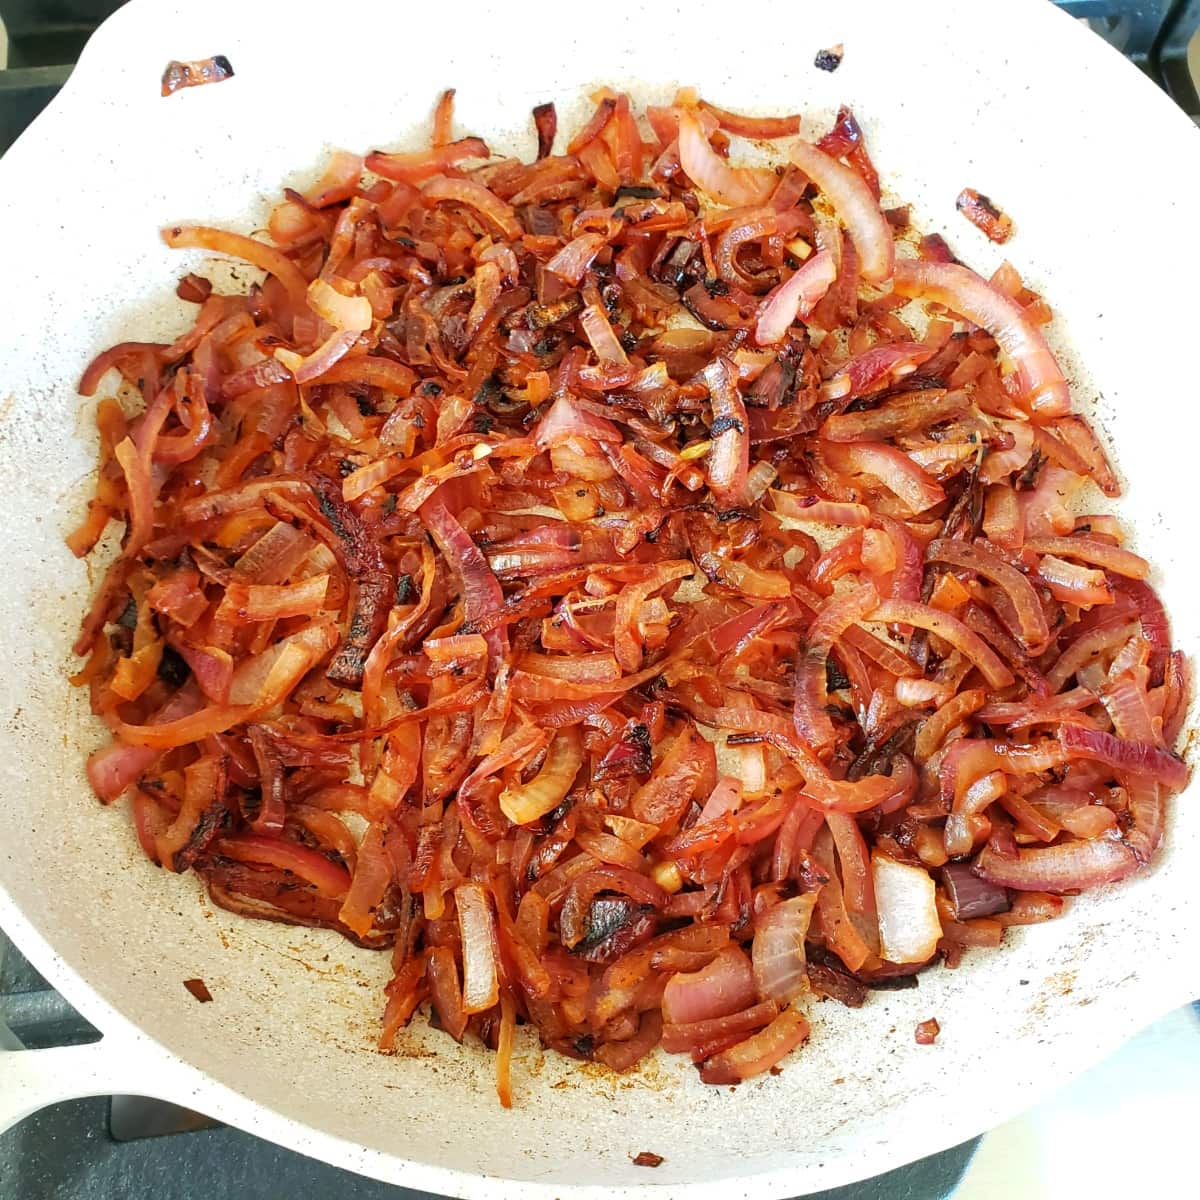 Sautéed onions are done in the skillet